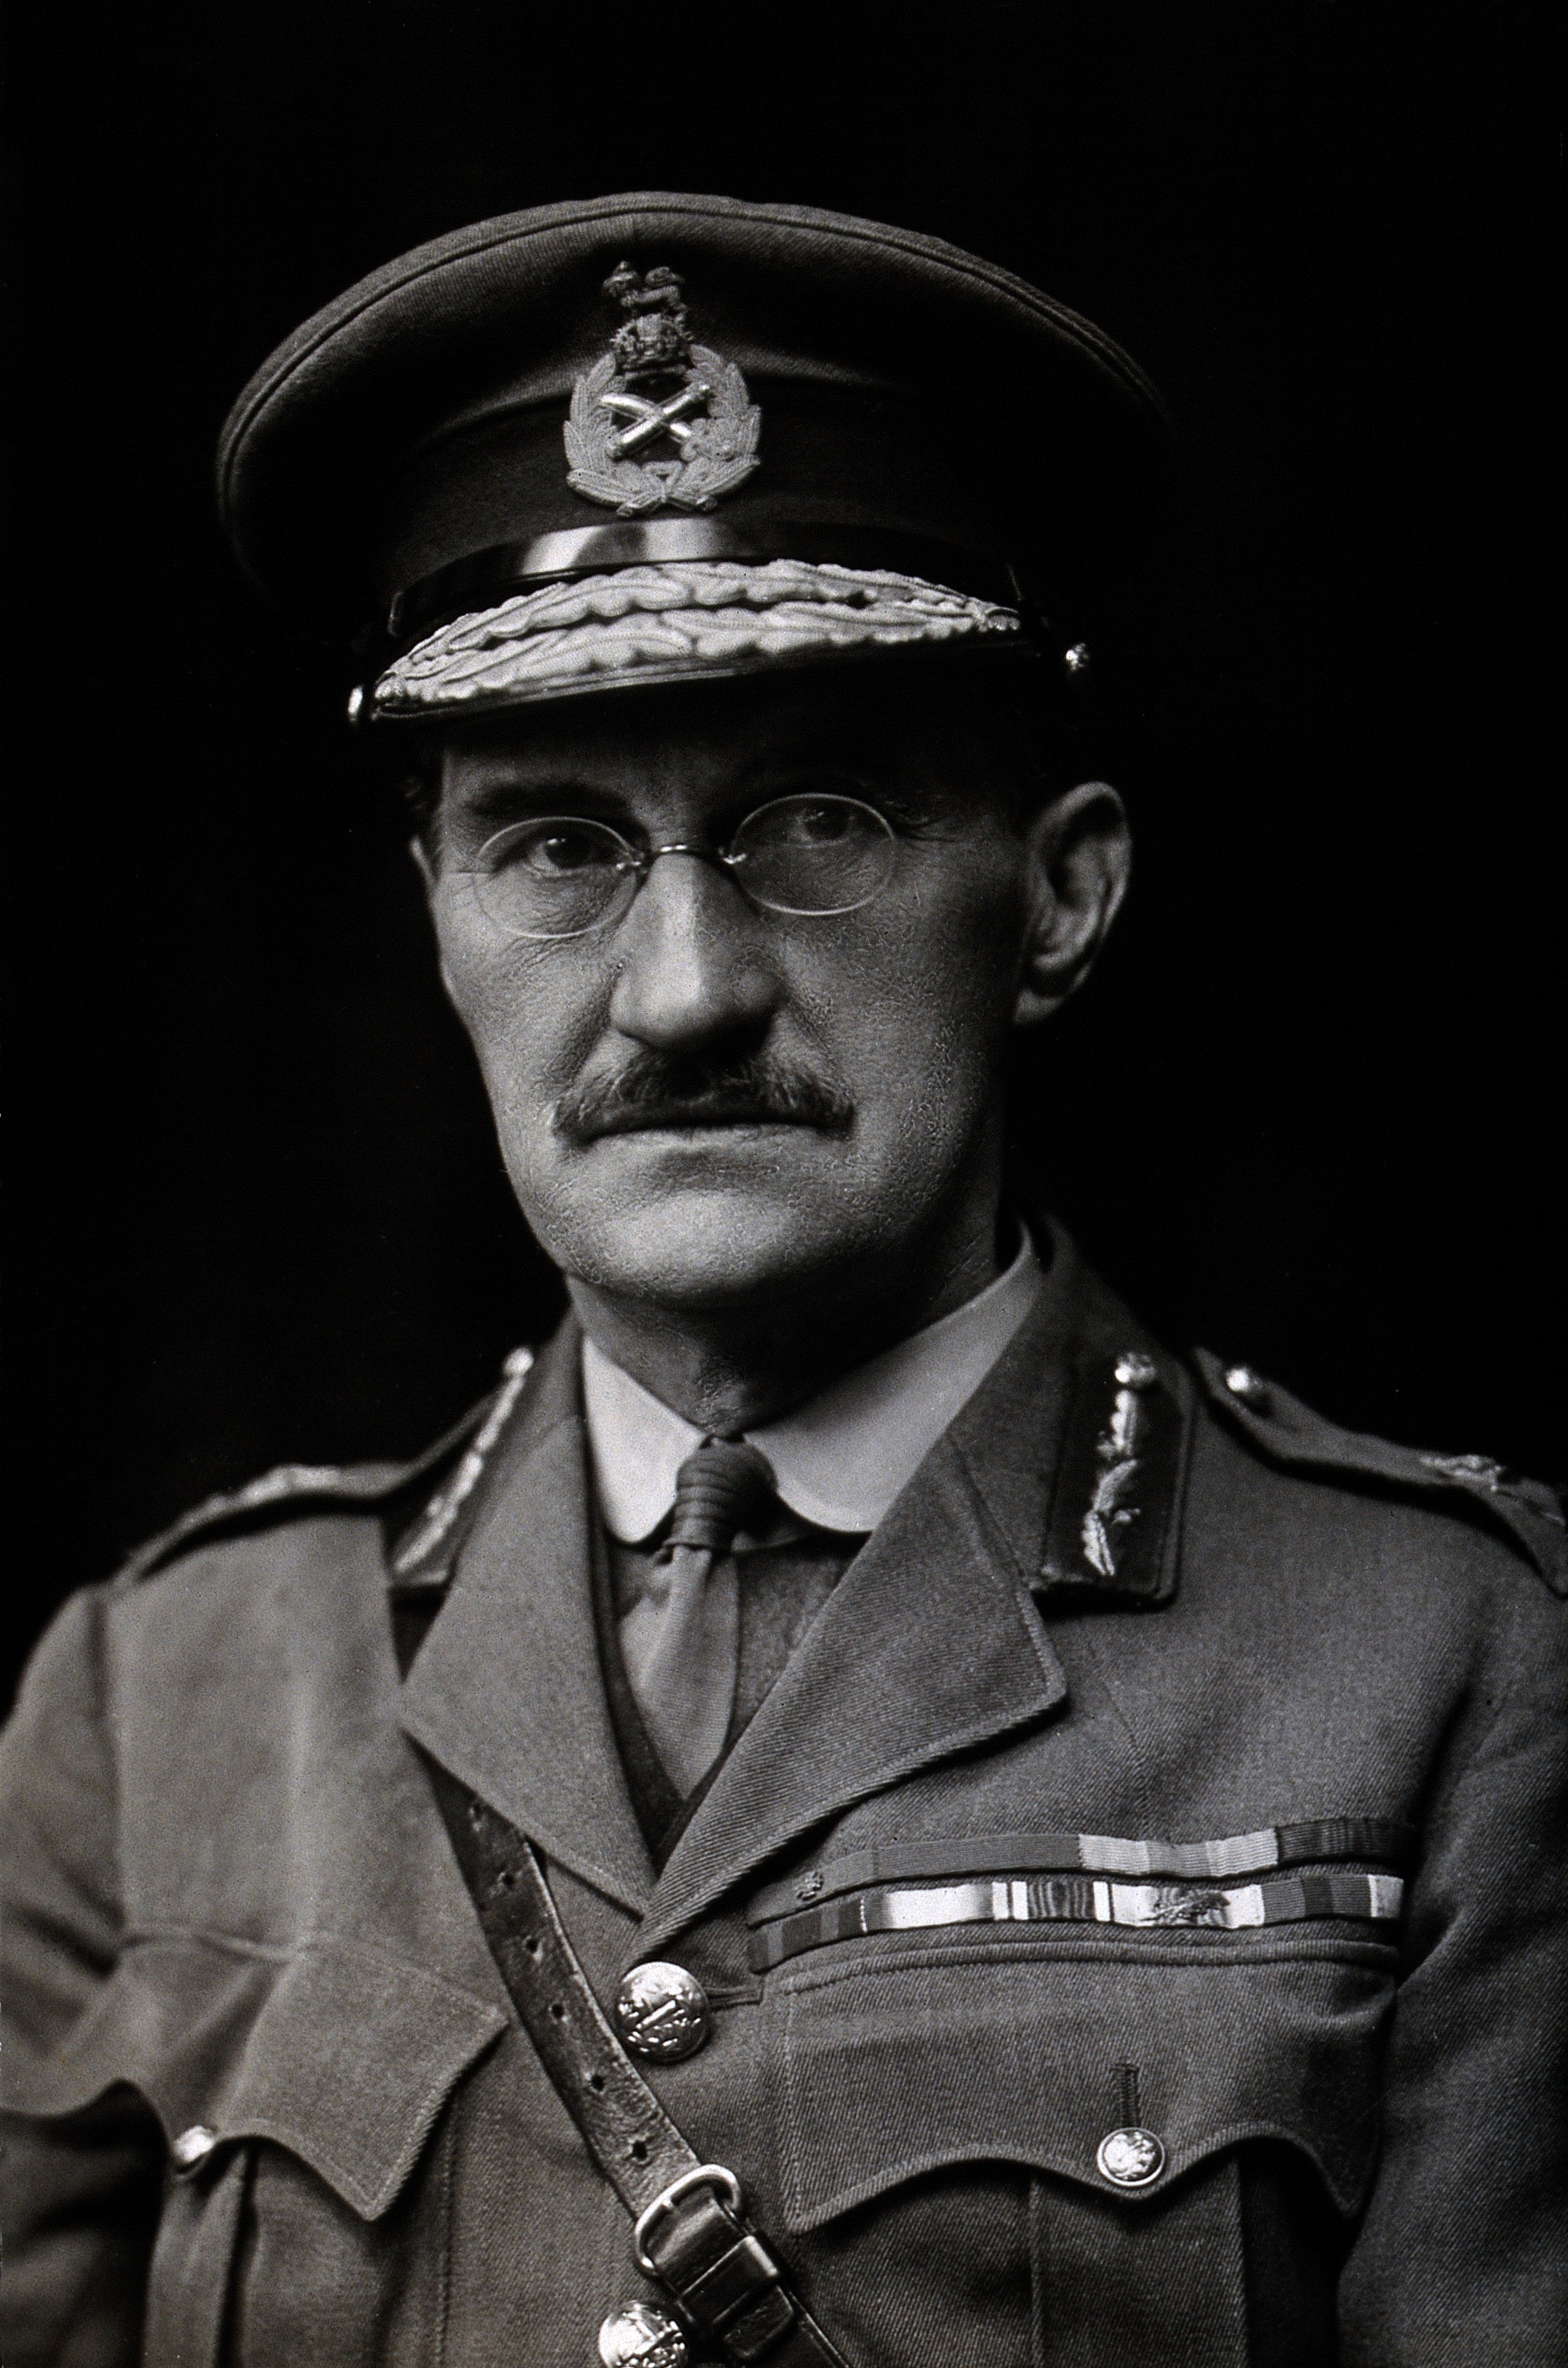 General Sir William Babtie. Photograph by J. Russell & Sons. Wellcome V0025984